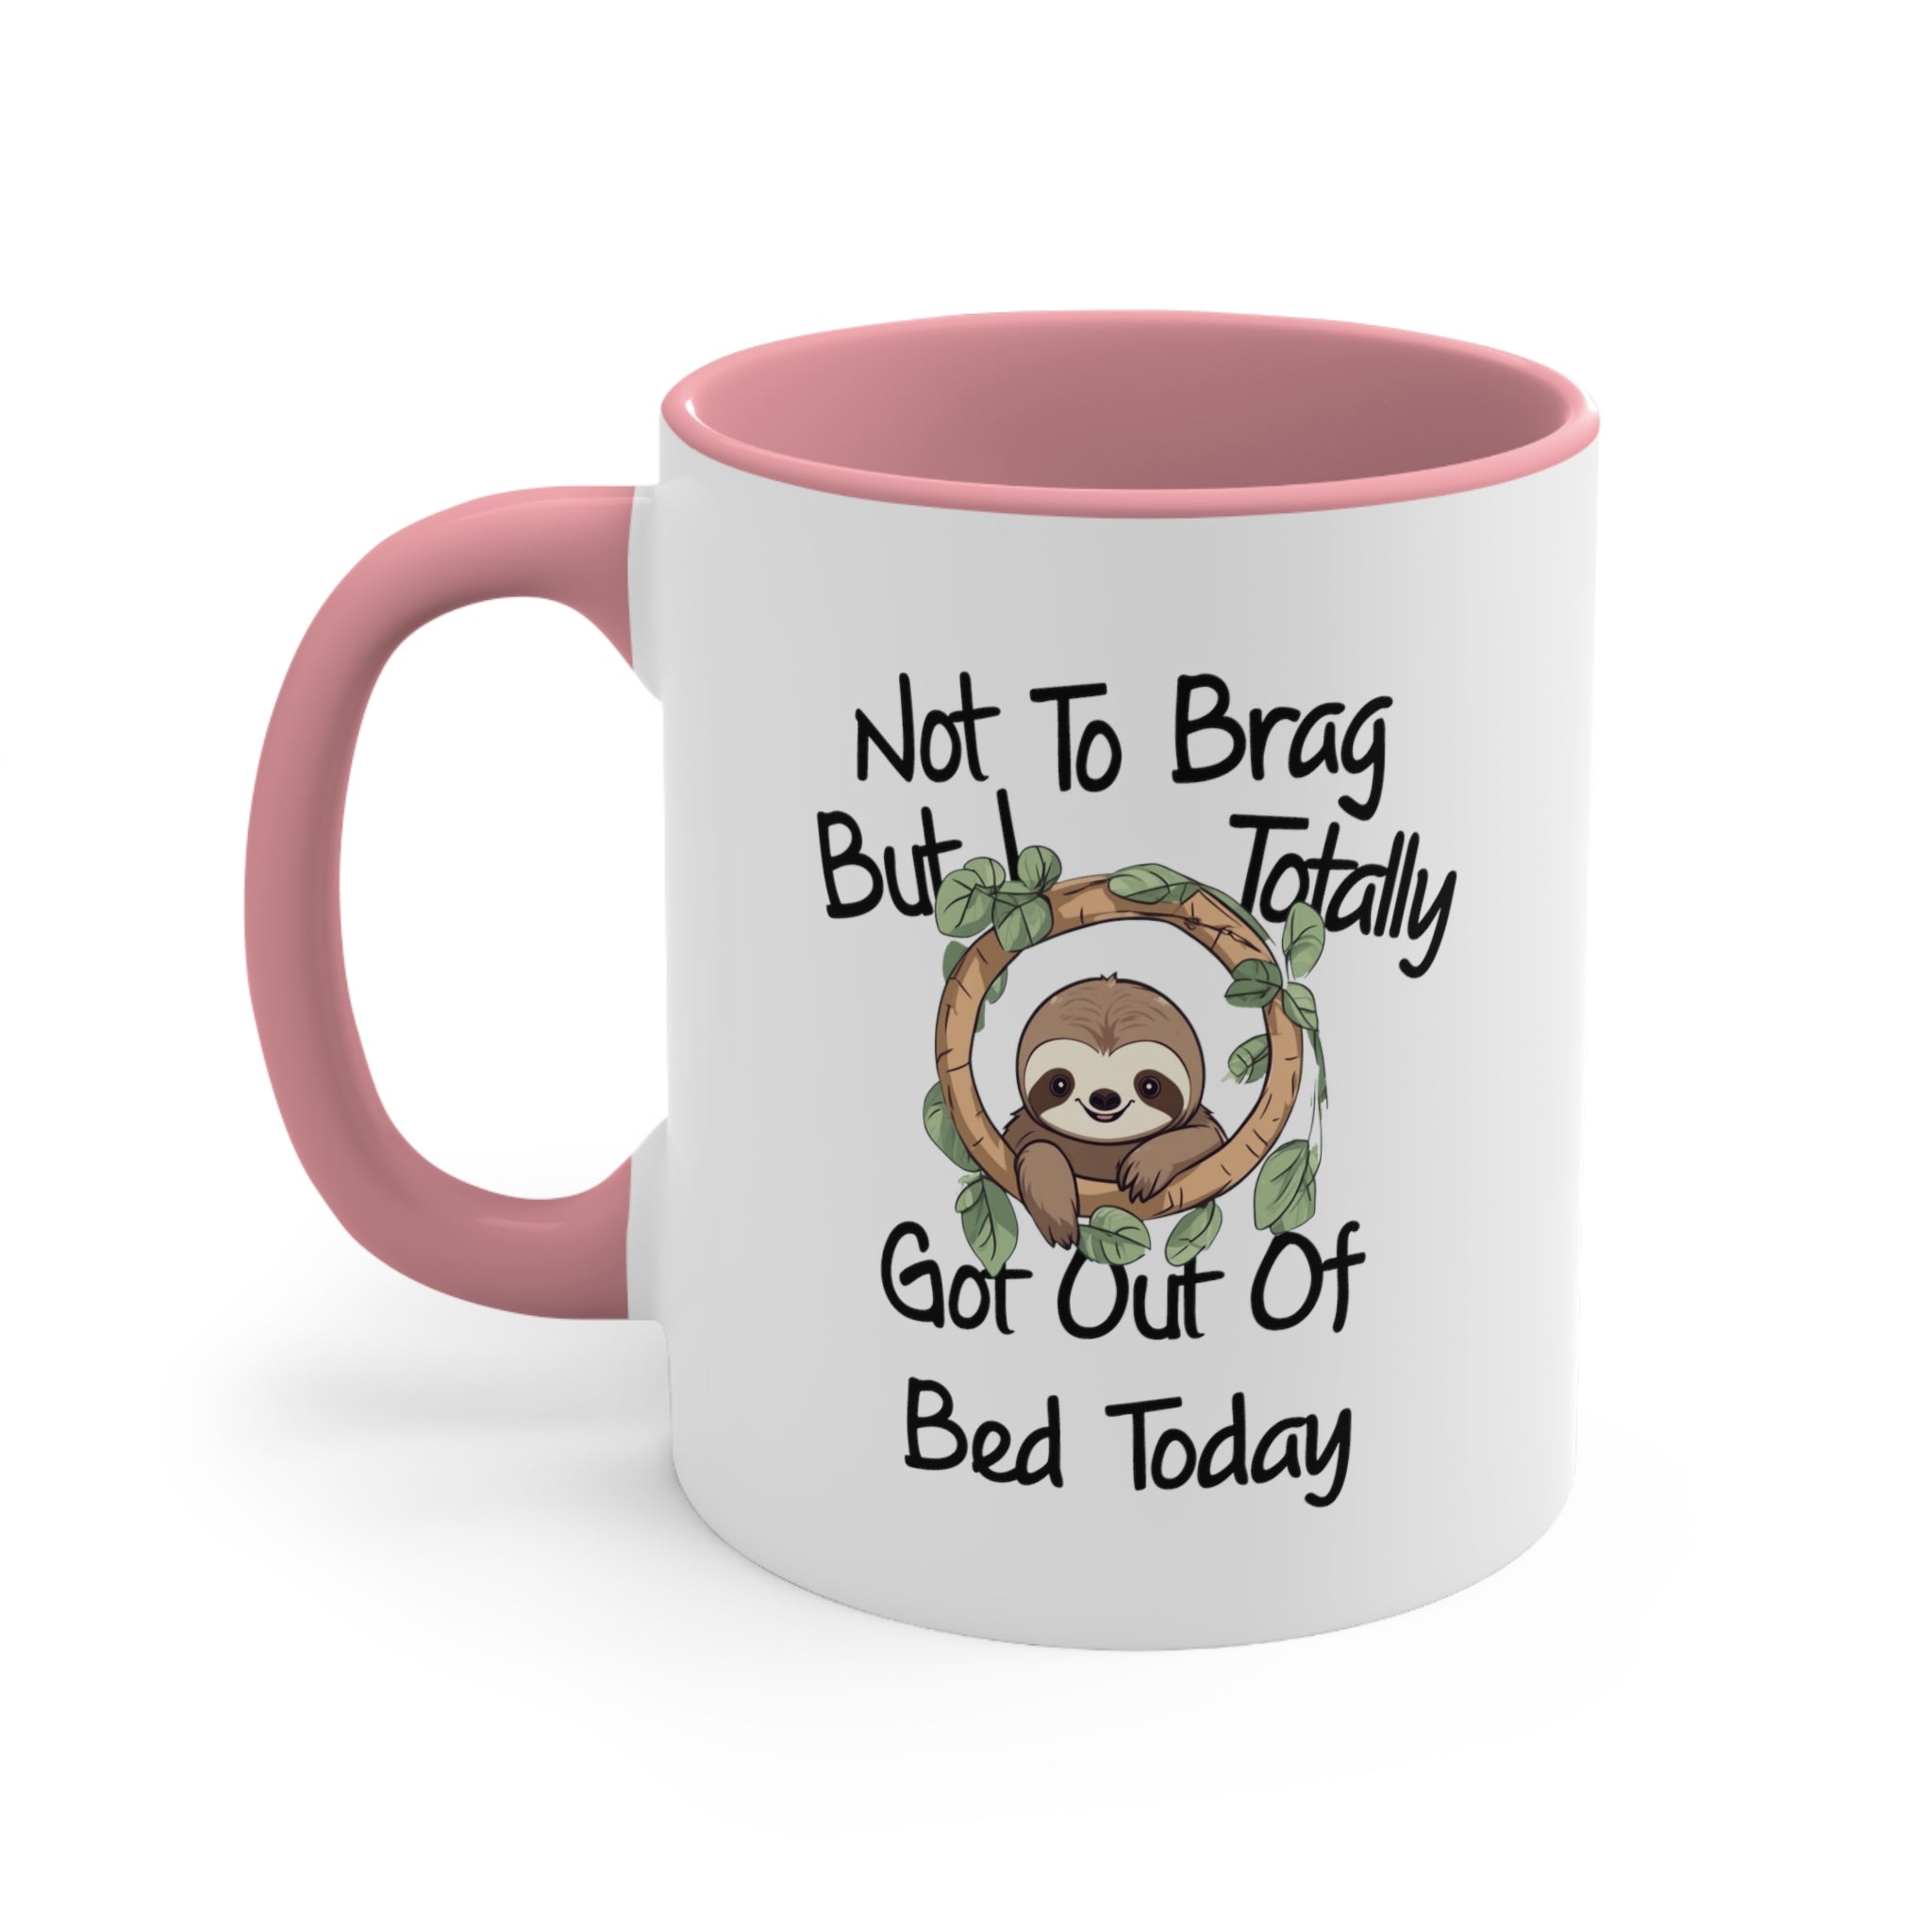 Funny Sloth Coffee Mug, 11oz Not To Brag But I Totally Got Out Of Bed Sloths Humor Humour Joke Comedy Cup